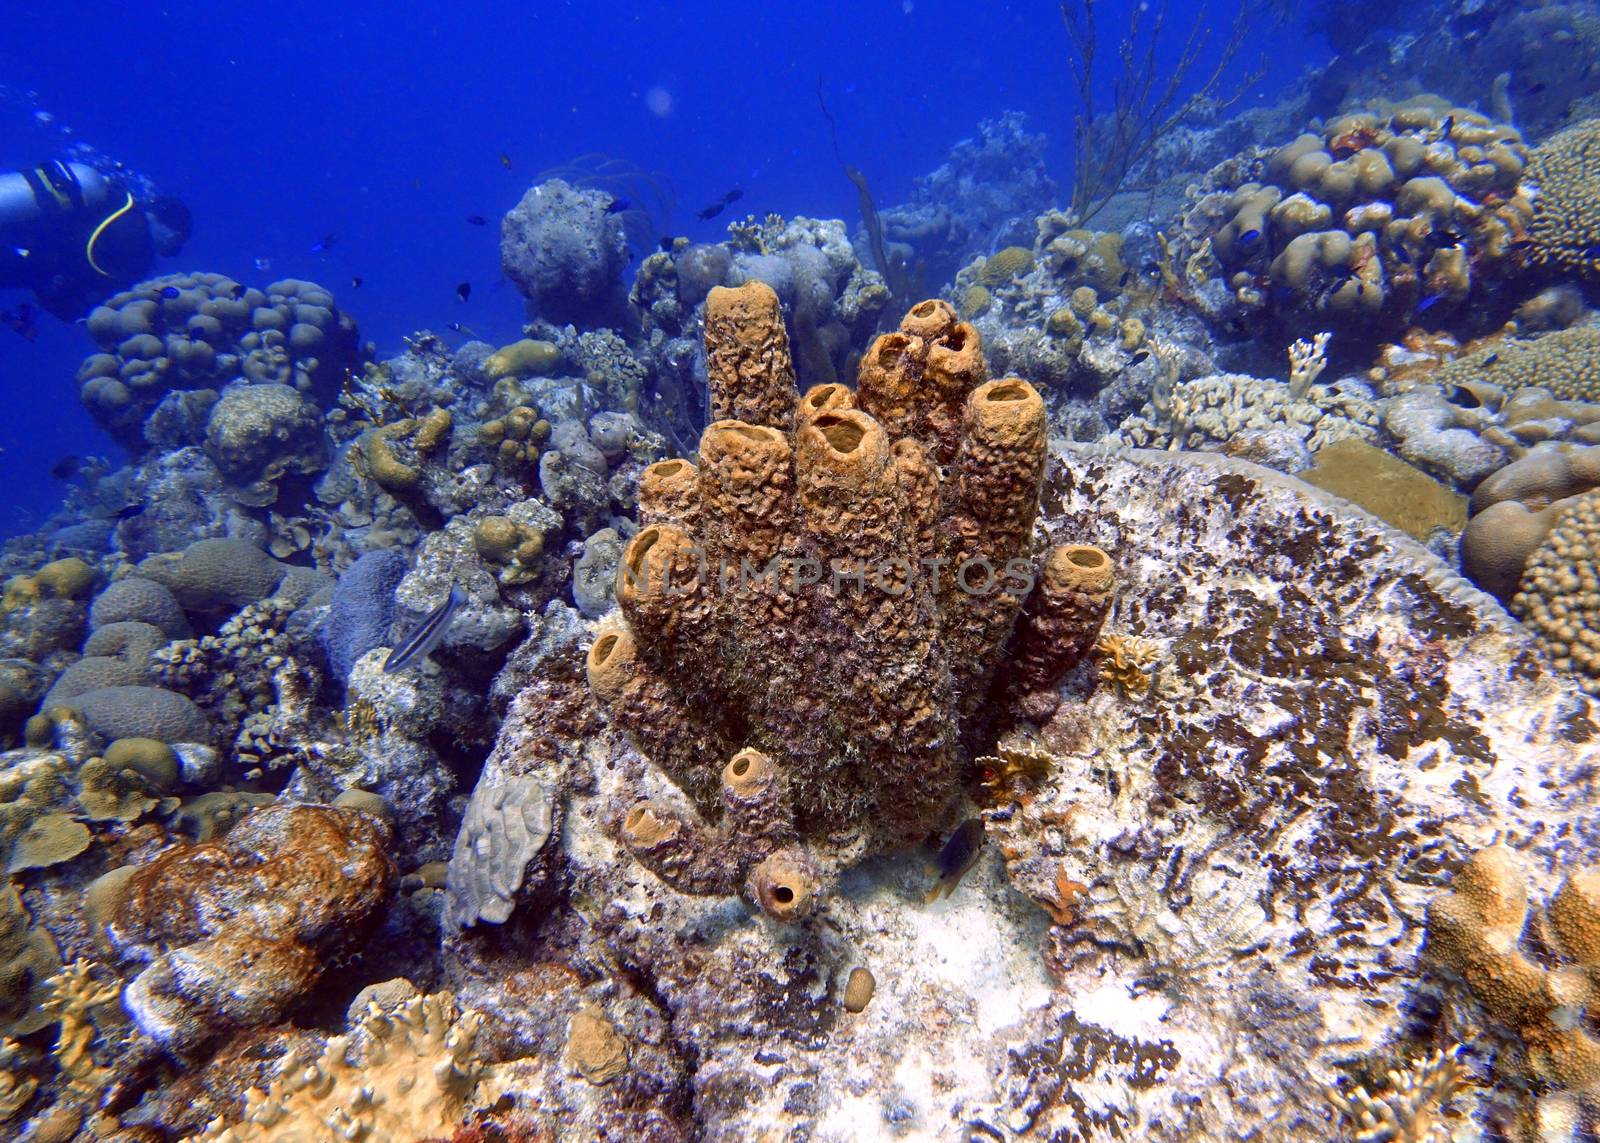 An underwater photo of a Tublular Sponges or Callyspongia vaginalis, known as the branching vase sponge is a demosponge. C. vaginalis usually has a tubular growth pattern, although the magnitude of the current affects its growth form.